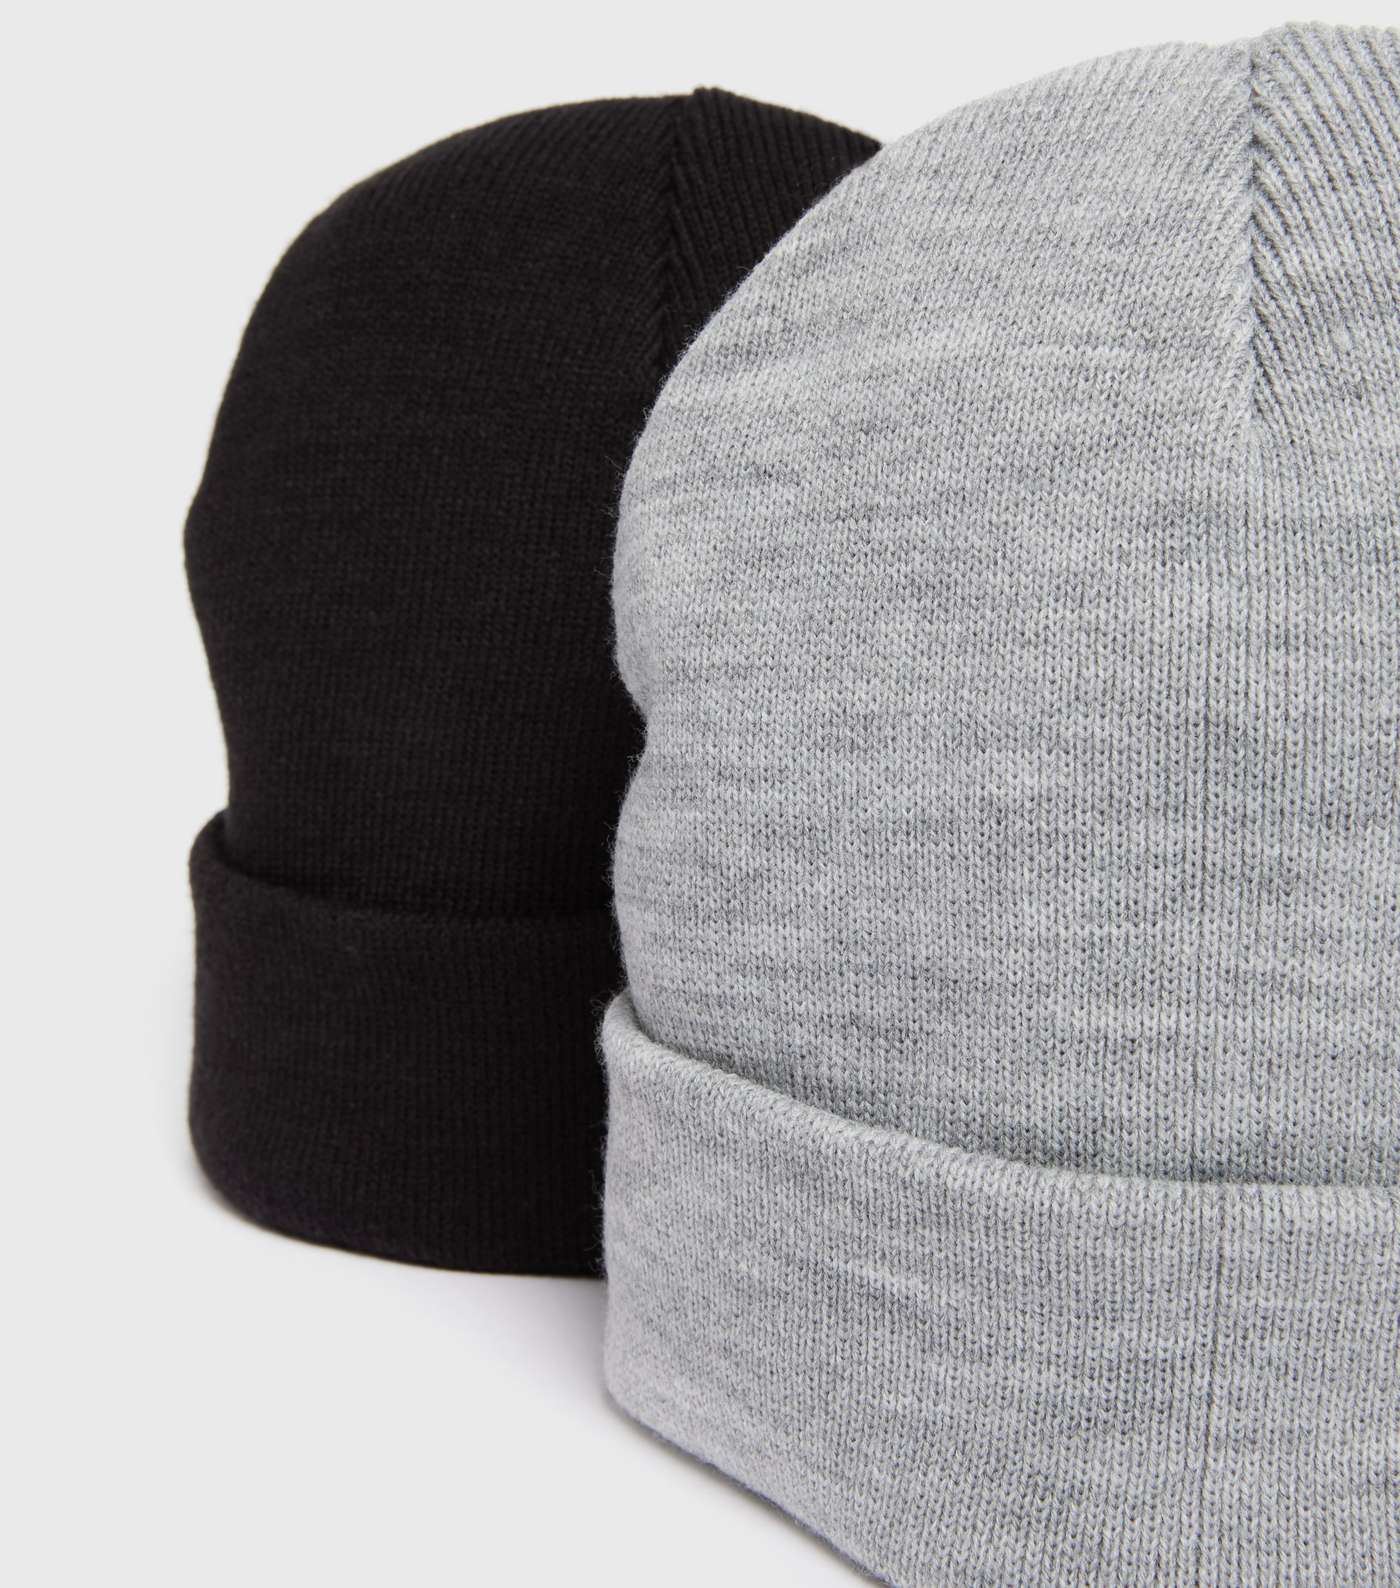 2 Pack Black and Grey Knit Beanies Image 3